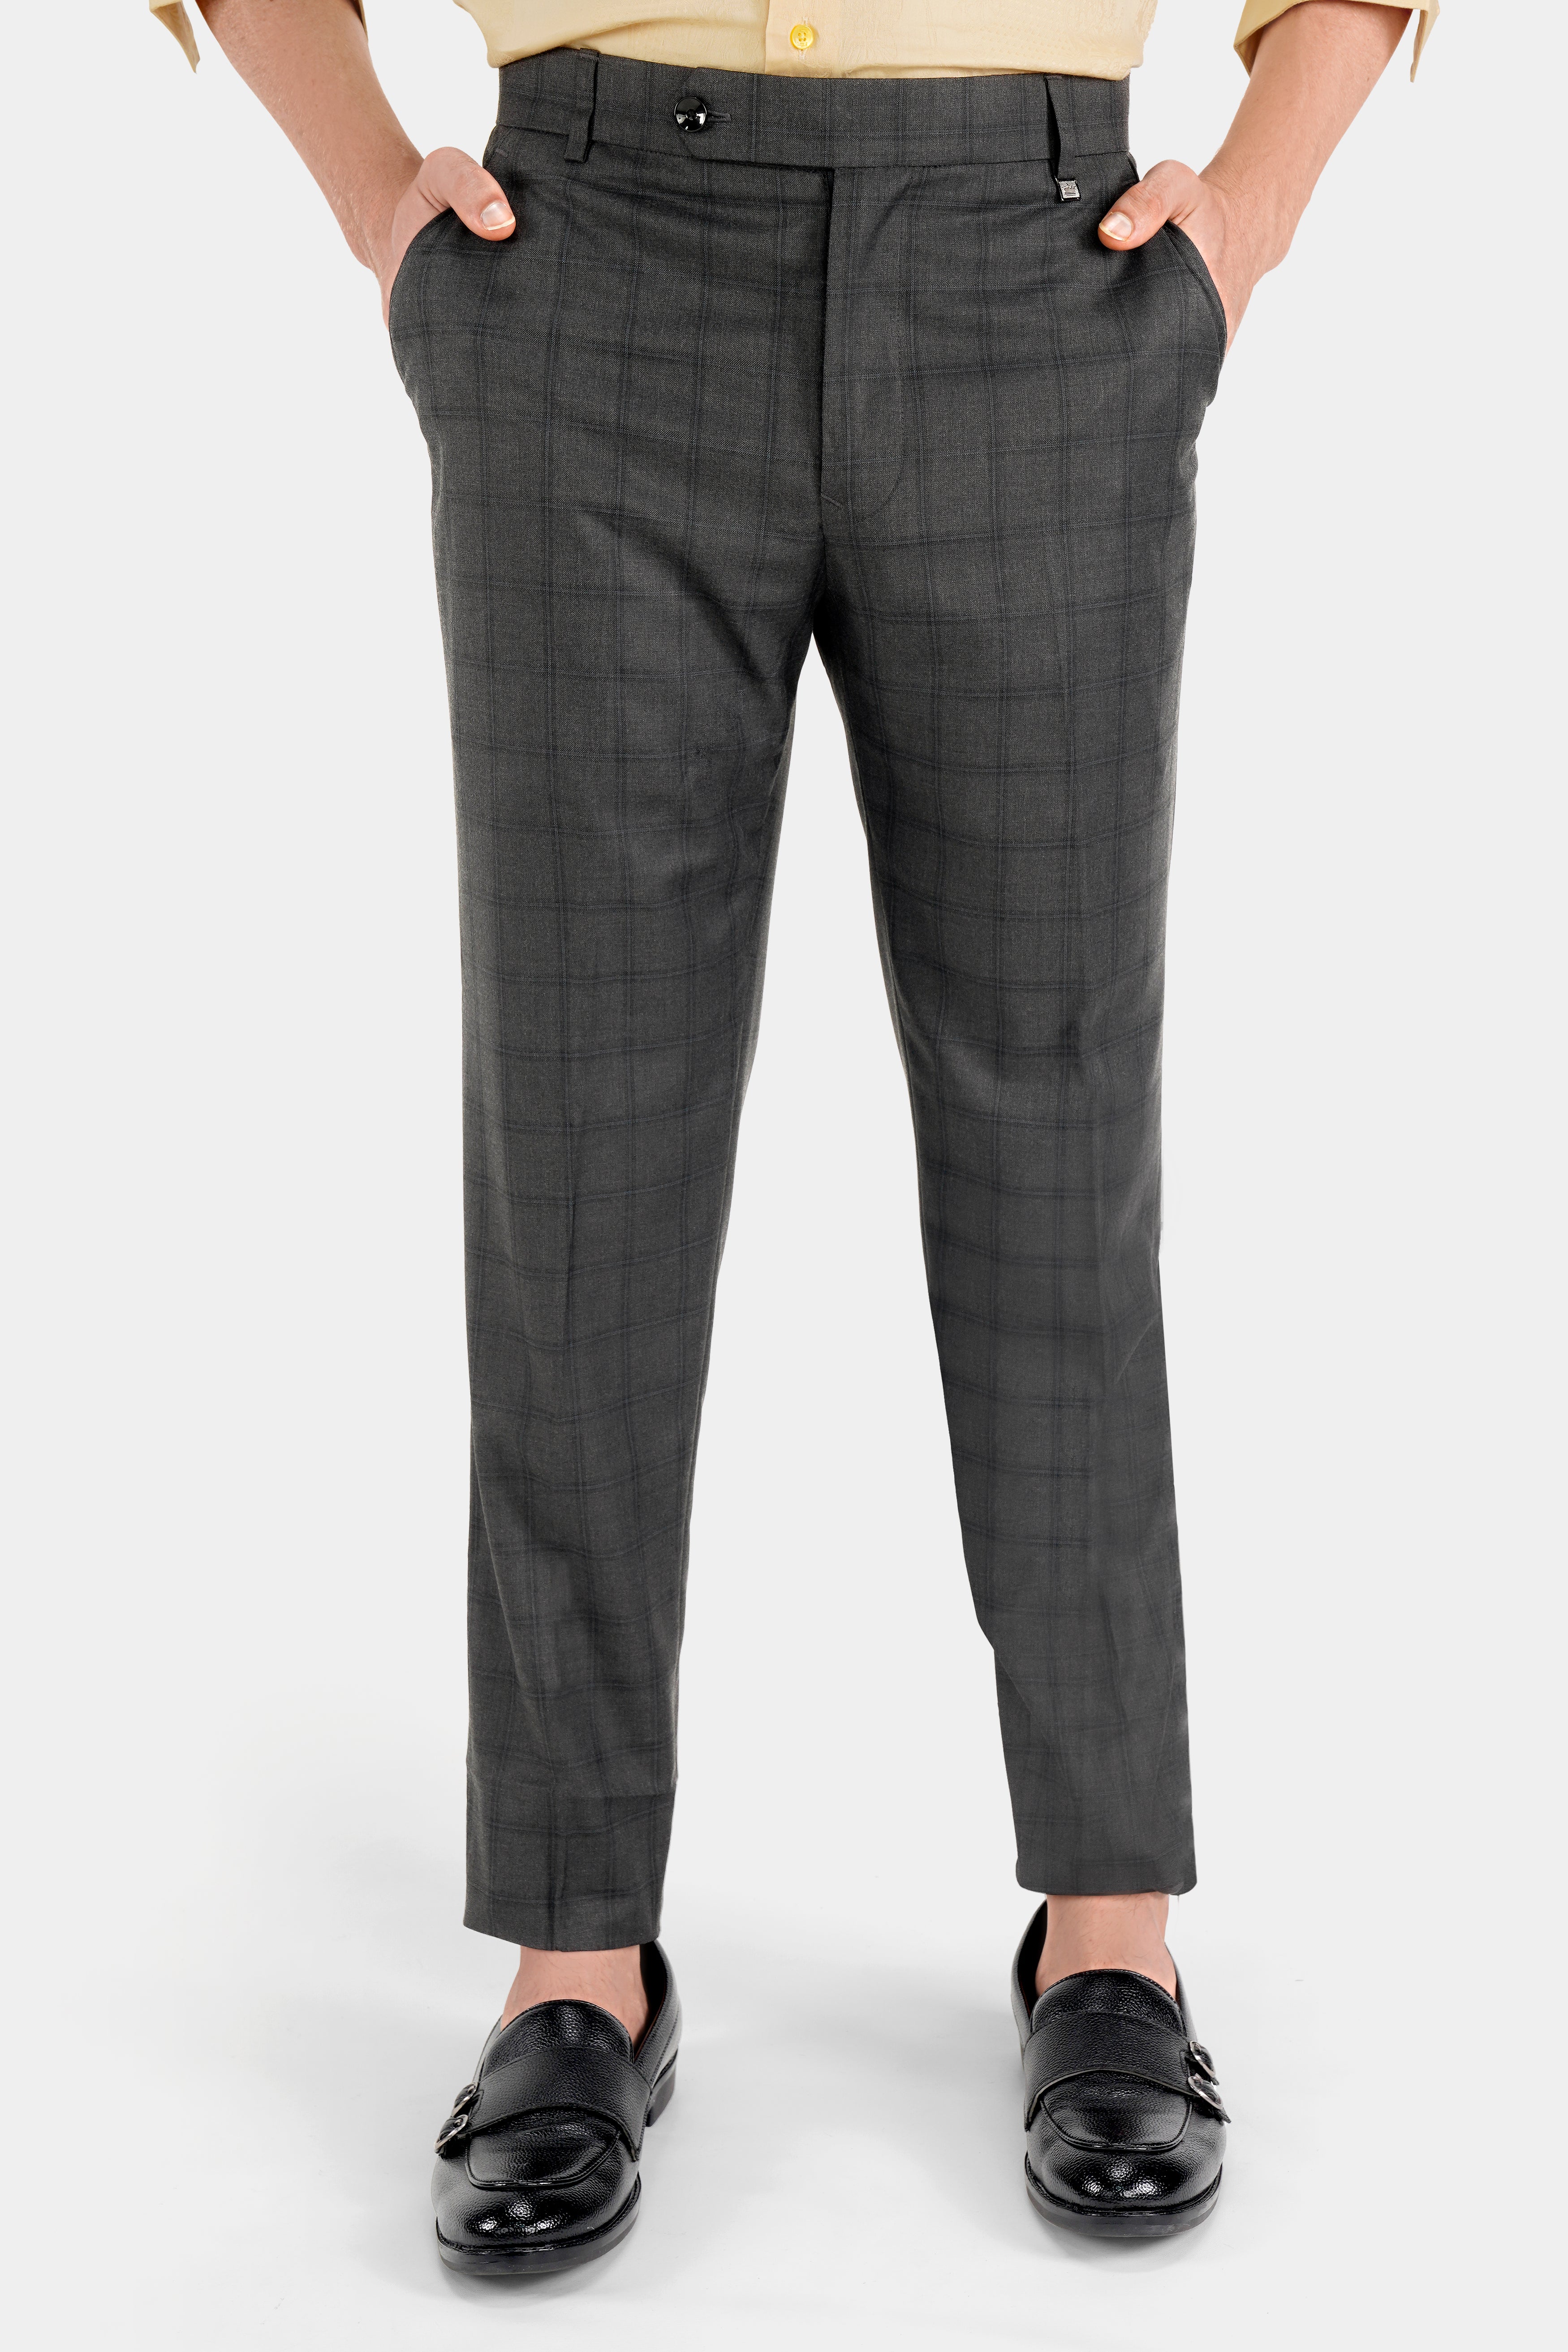 Chicago Gray Checkered Wool Rich Pant T2741-28, T2741-30, T2741-32, T2741-34, T2741-36, T2741-38, T2741-40, T2741-42, T2741-44